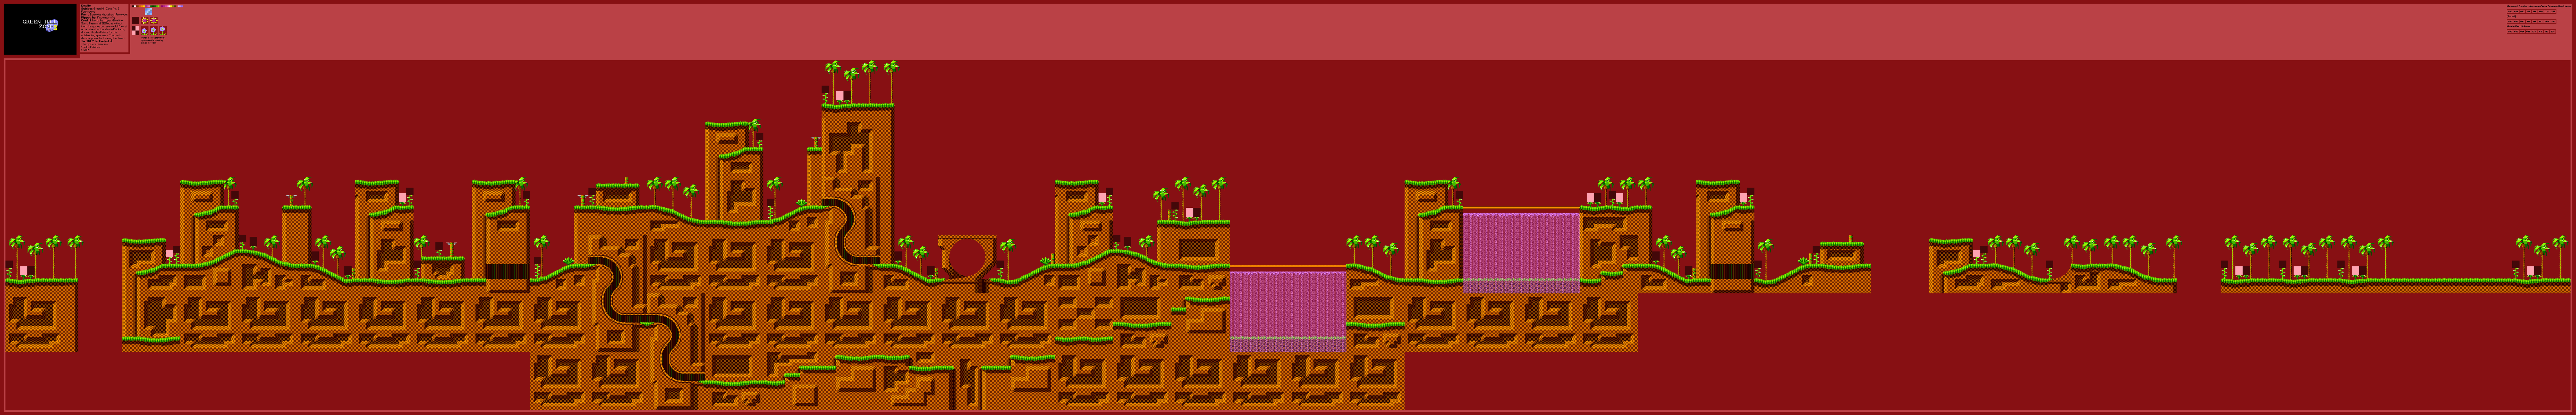 Project green hill zone [Sonic 3 A.I.R.] [Projects]